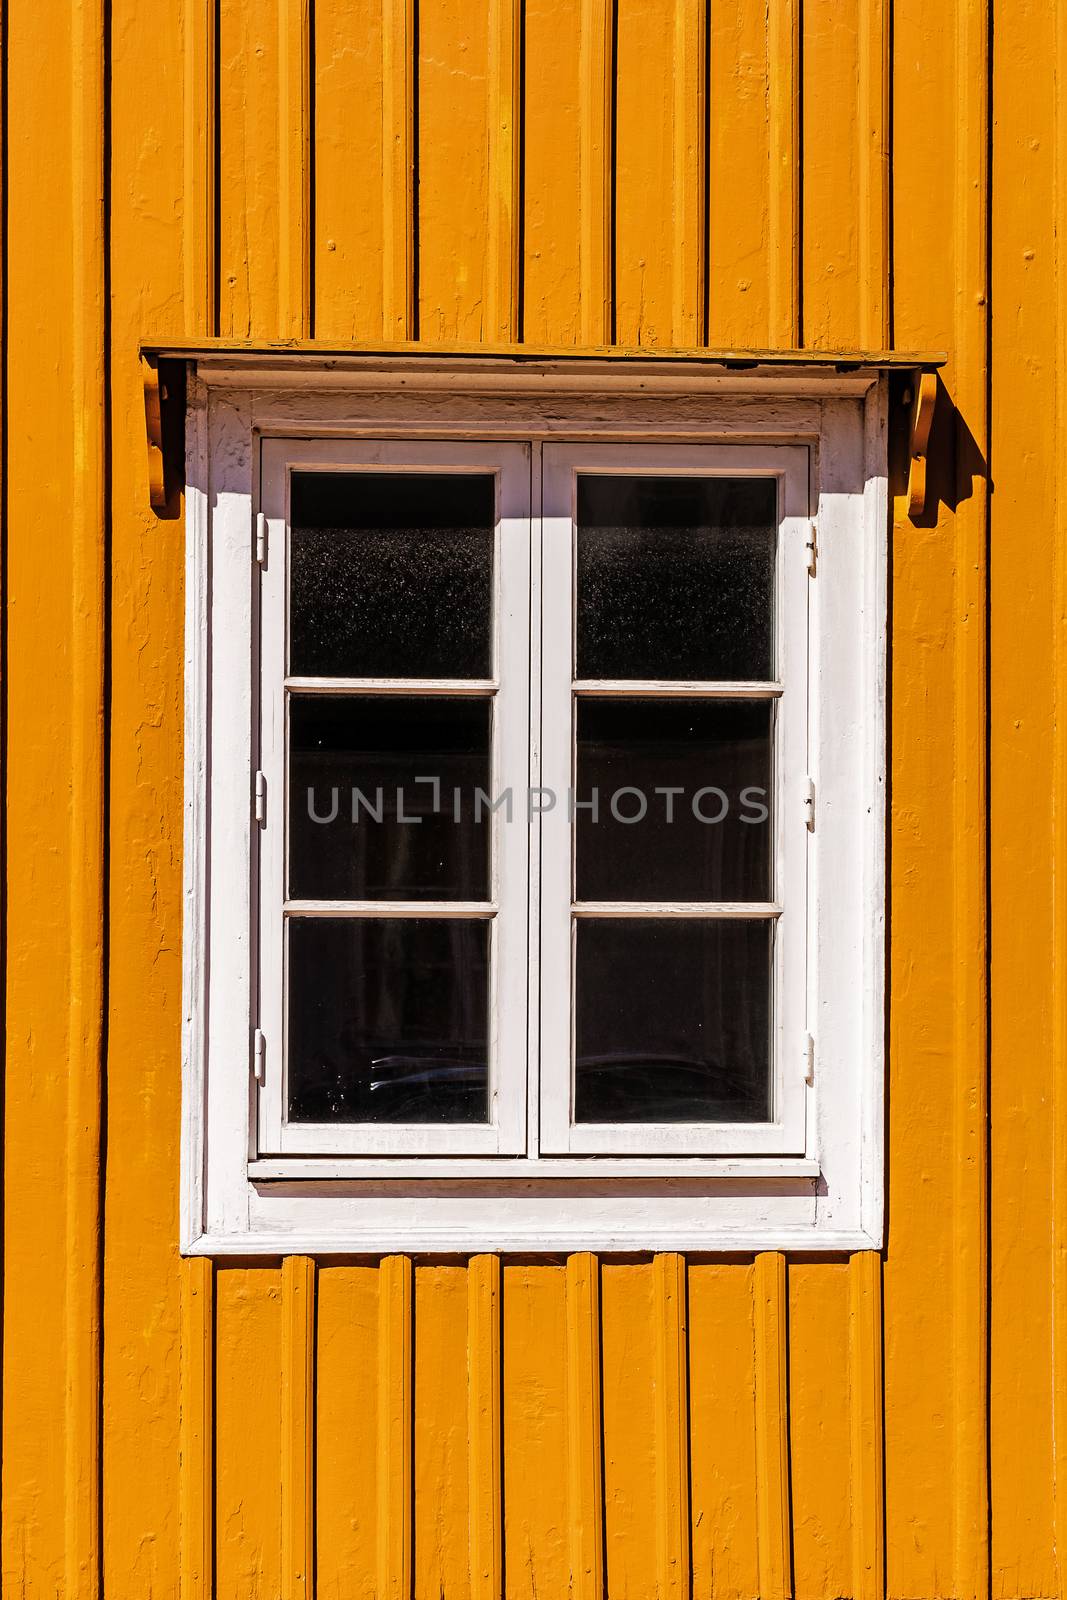 Window on a wooden facade, exapmle of typical Swedish traditional architecture.